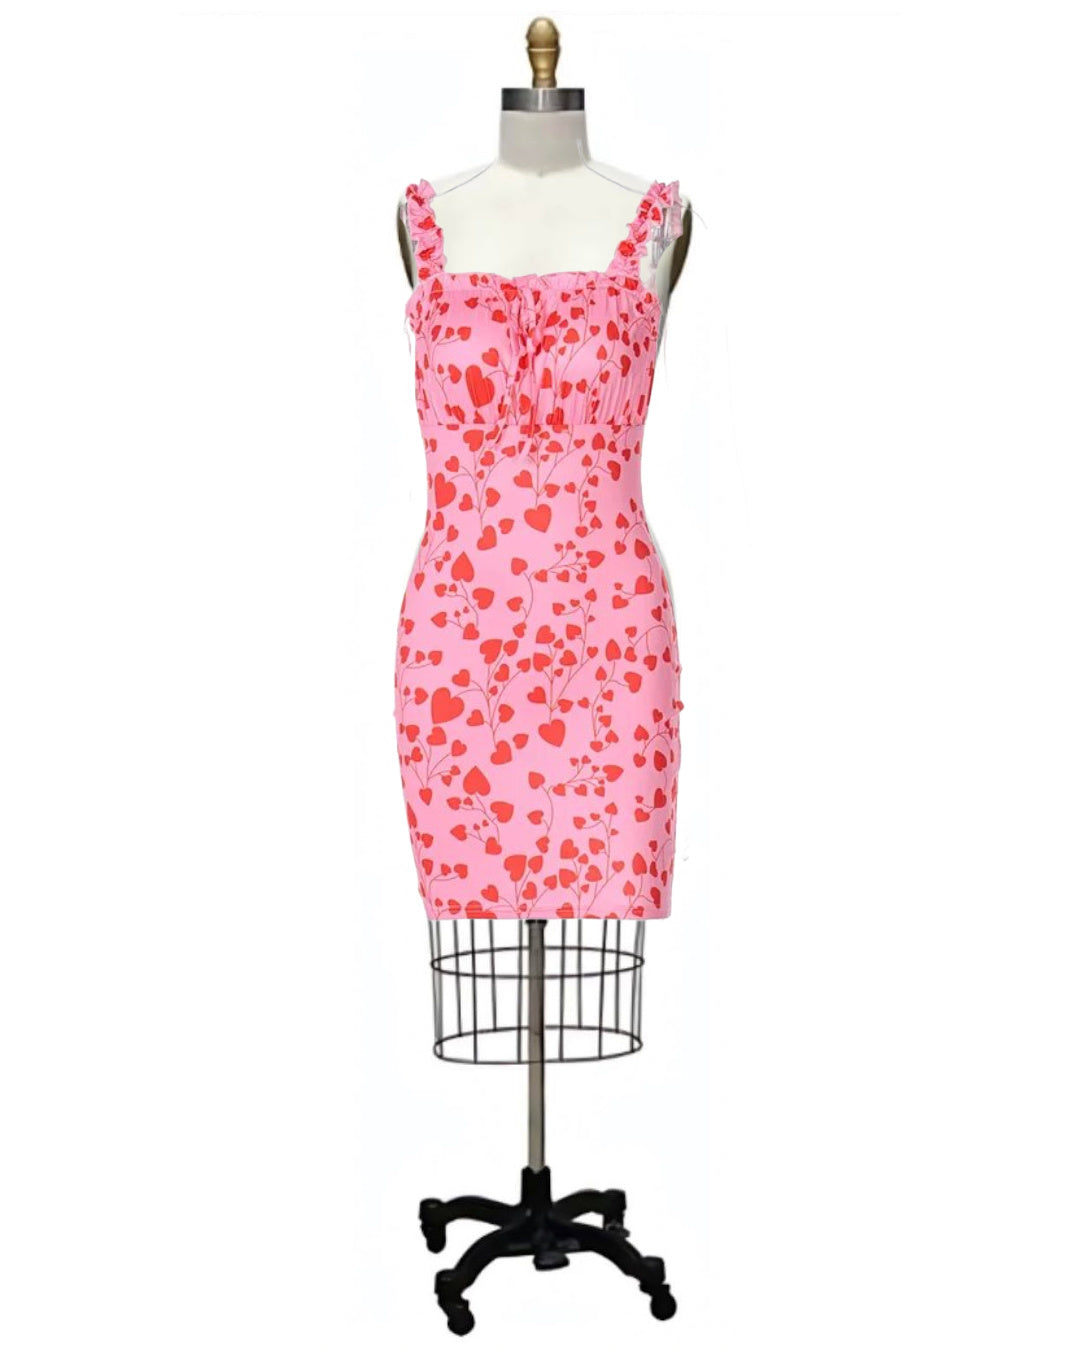 Y2K Love- the Pink 90s Inspired Mini Dress with Red Hearts